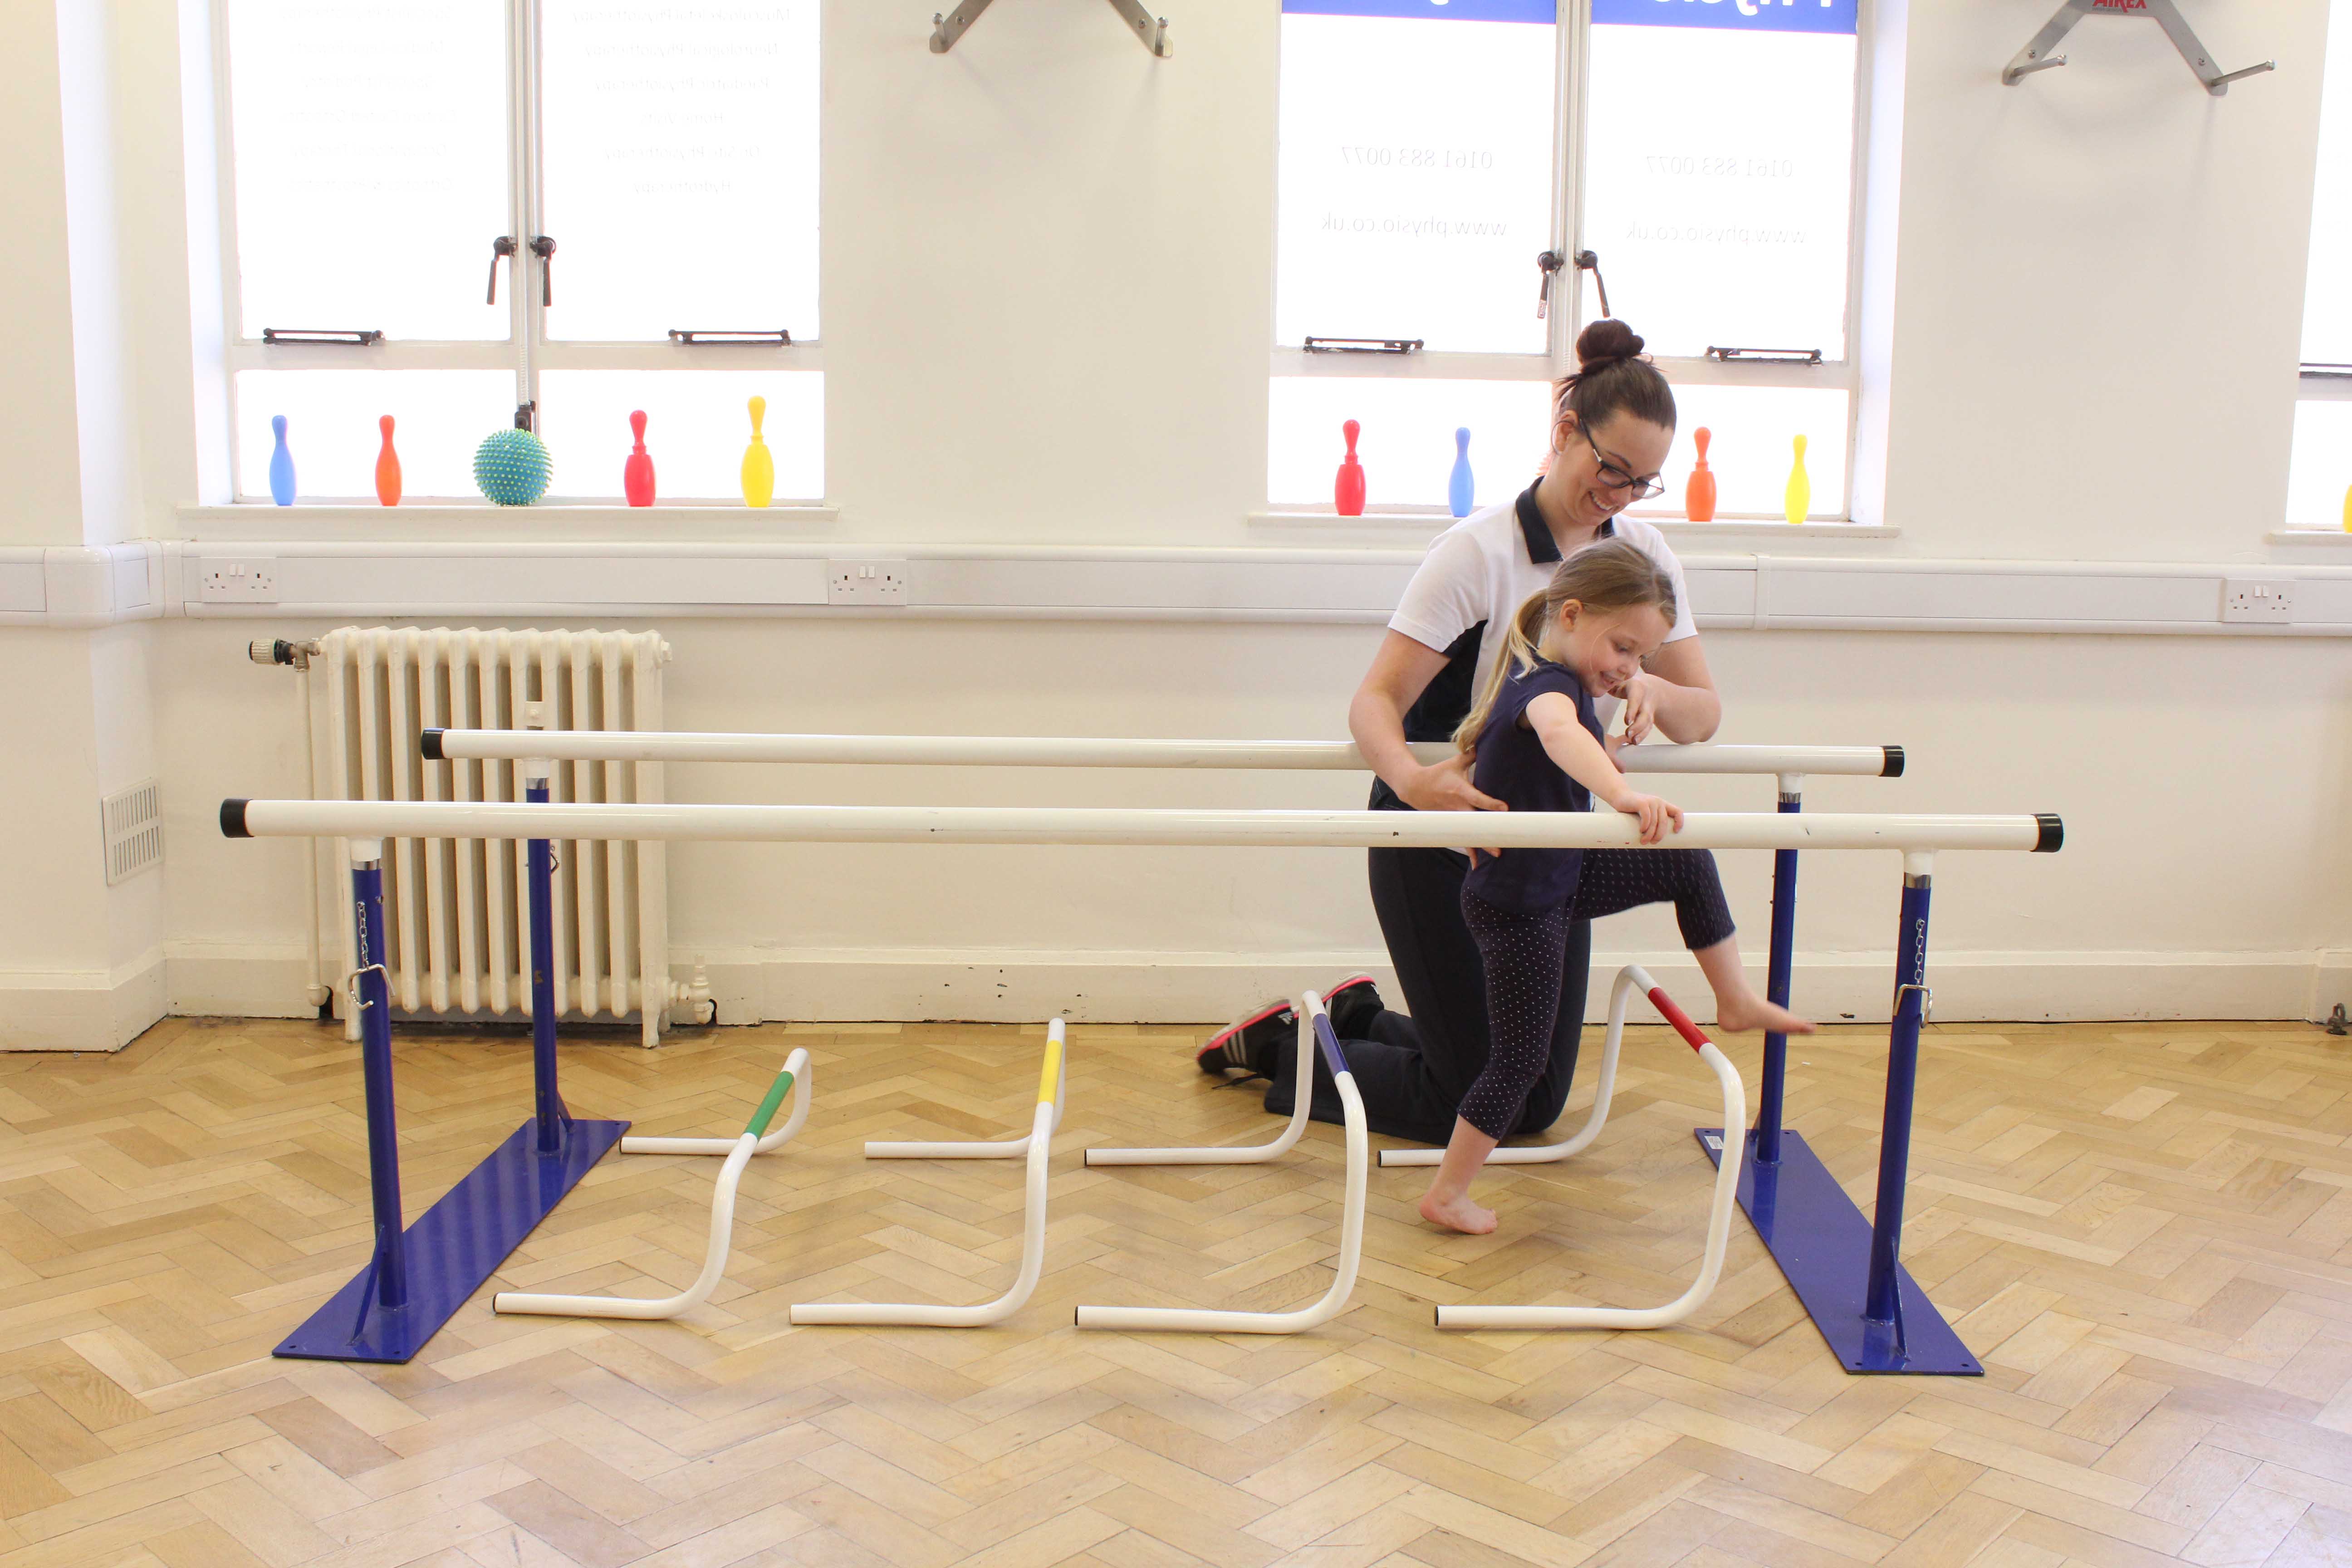 Mobilising sit to stand exercises with supervision of a neurological physiotherapist